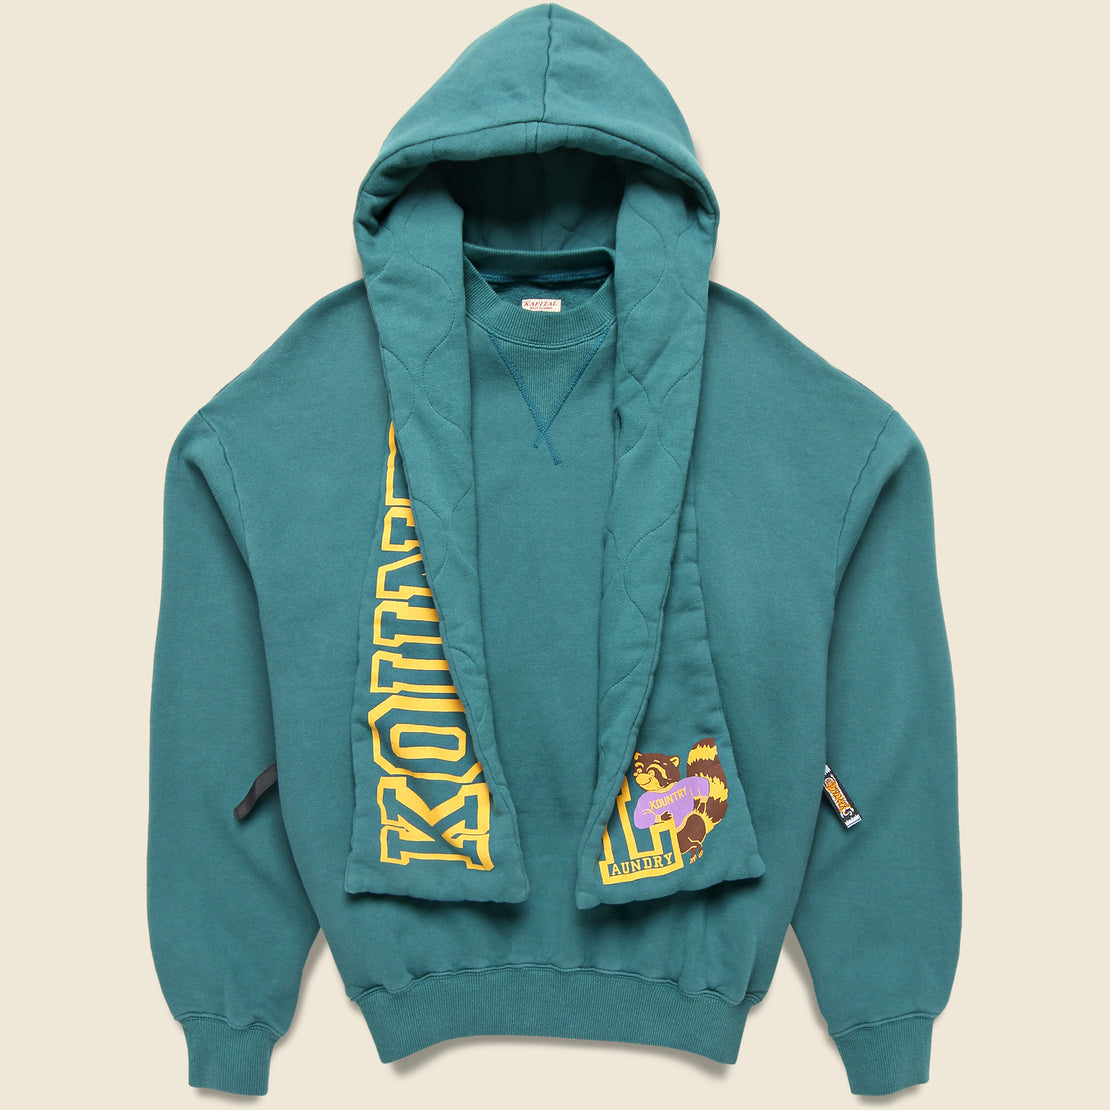 30/-Napped Lining SWT KESA Parka (KOUNTRY) - Turquoise - Kapital - STAG Provisions - Outerwear - Coat / Jacket